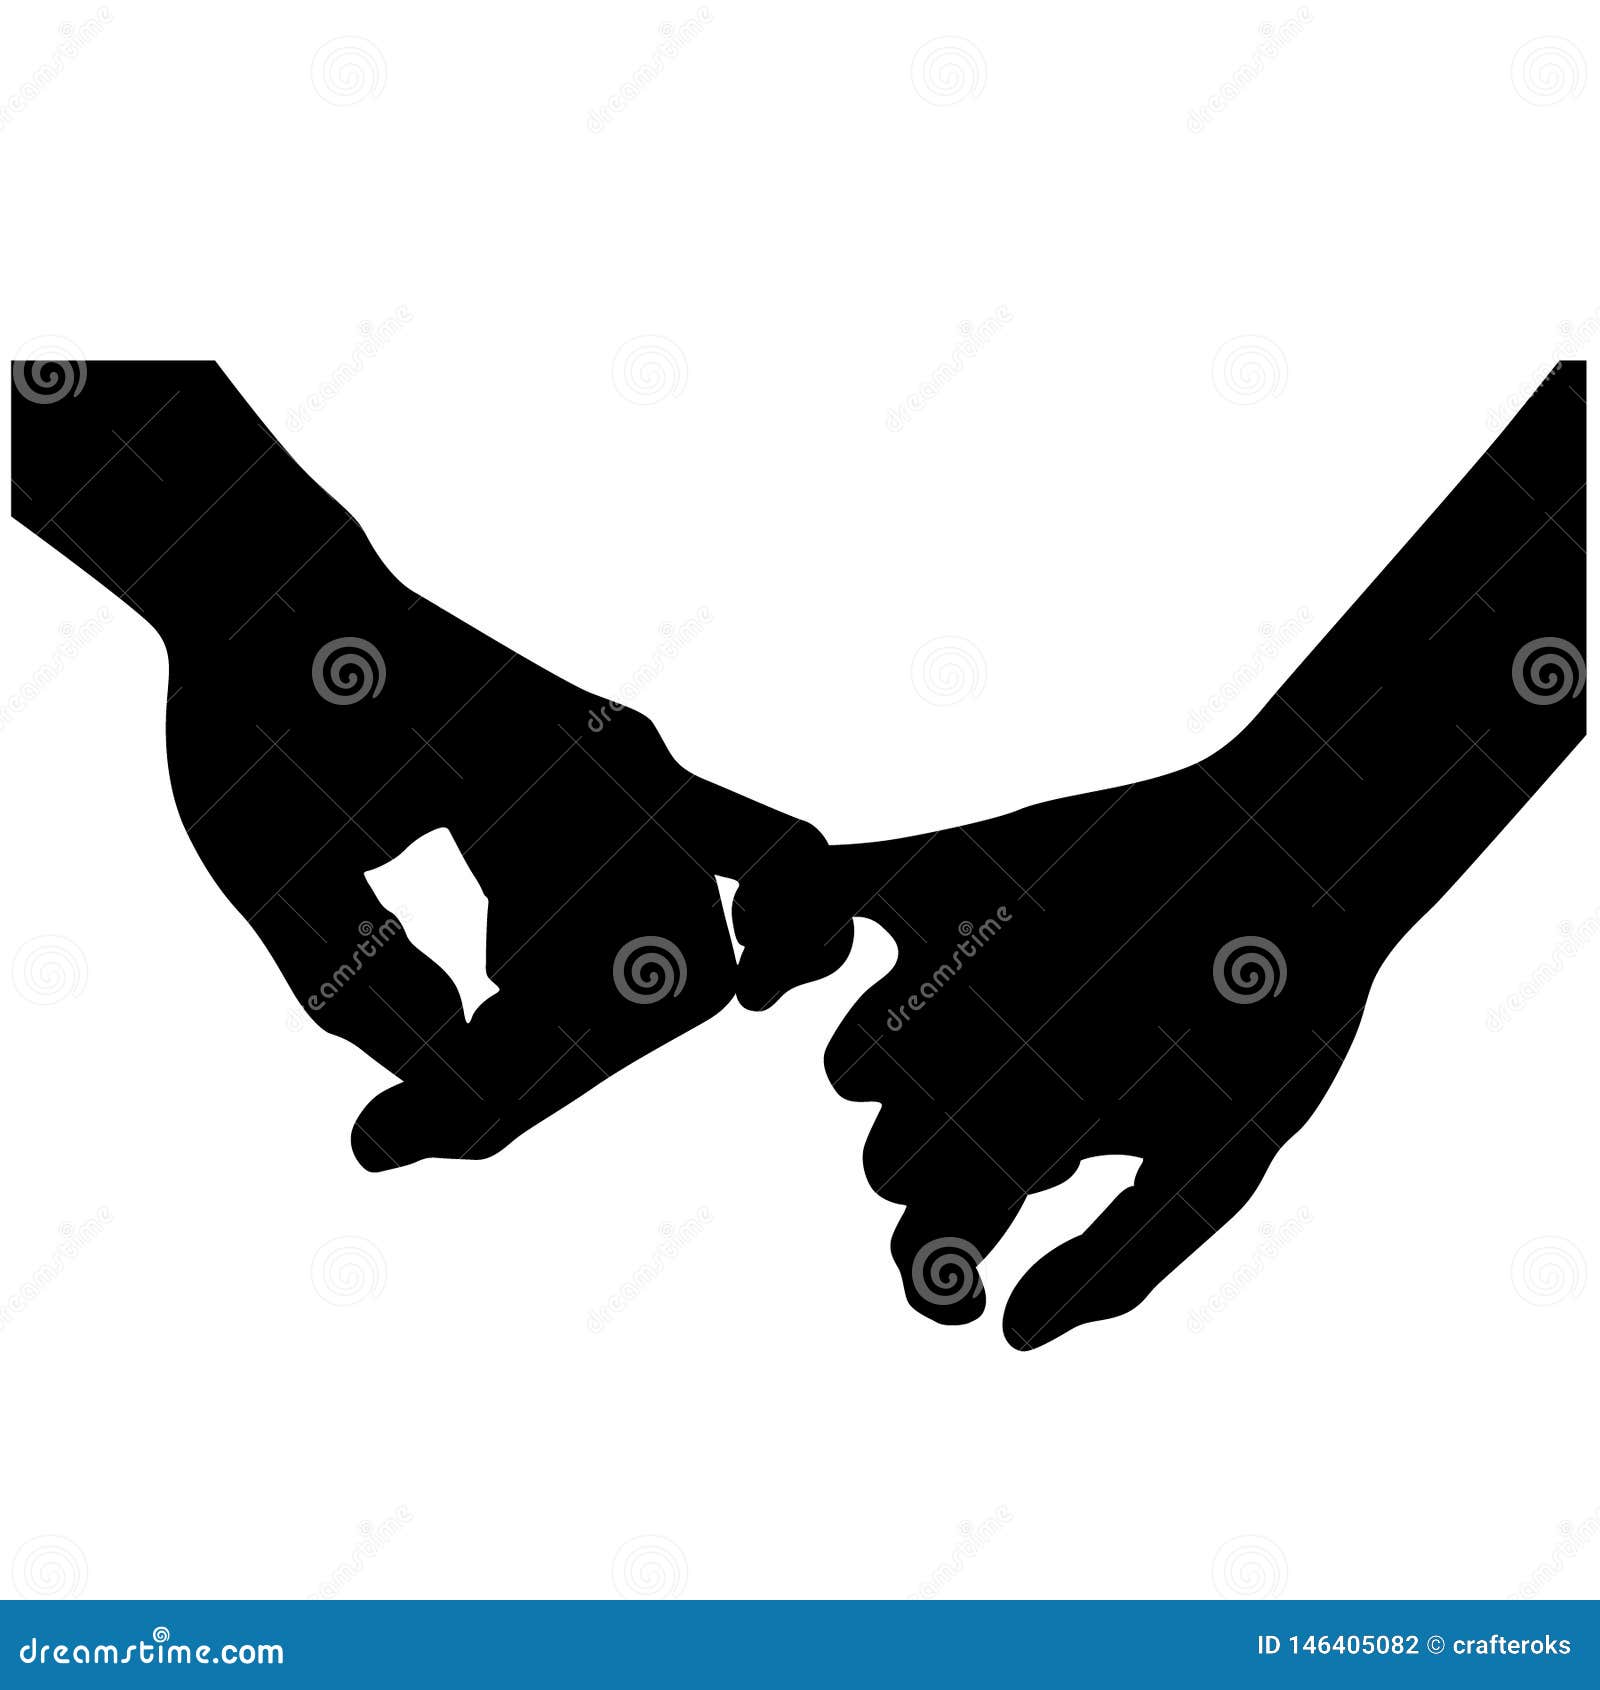 Download Pinky Promise Vector Illustration By Crafteroks Stock ...